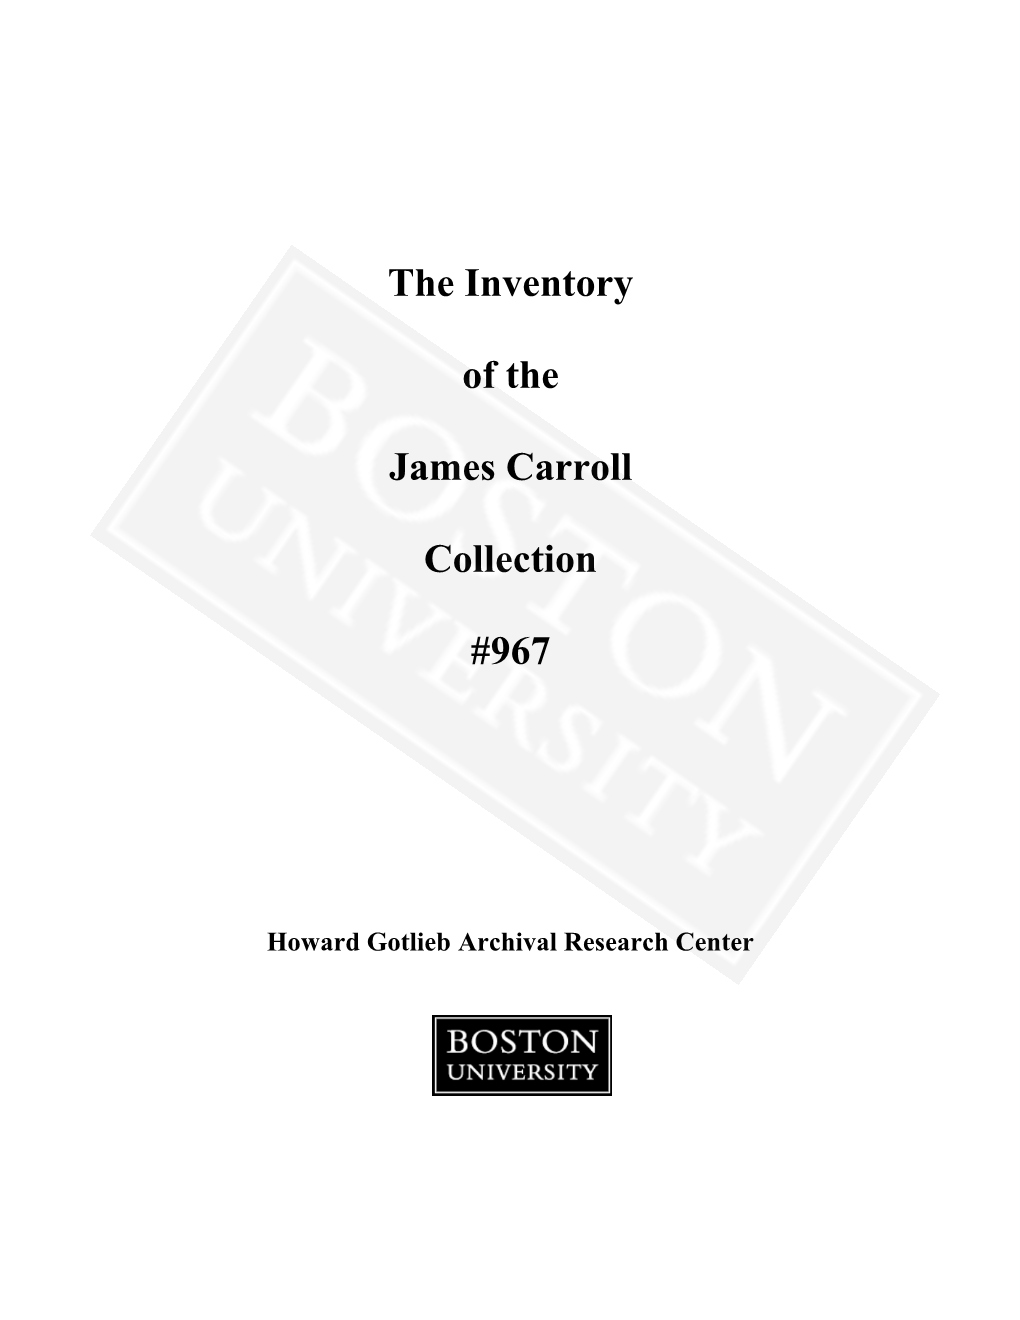 The Inventory of the James Carroll Collection #967